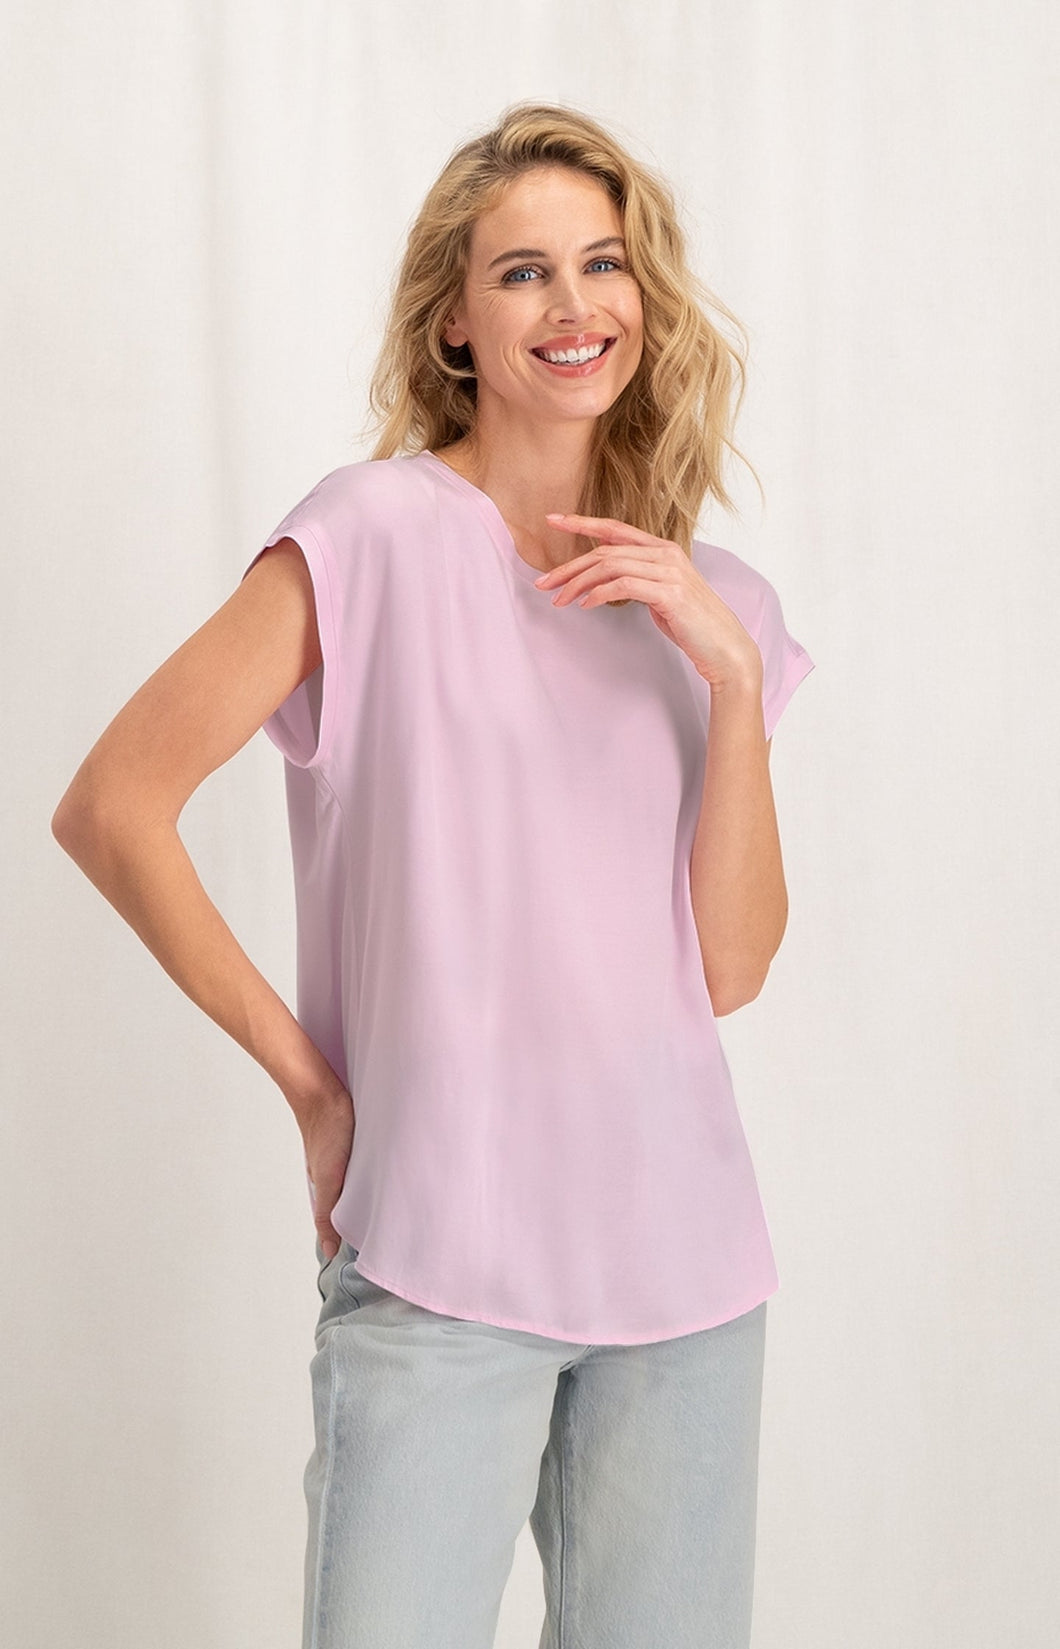 Sleeveless top with round neck in fabrix mix - Lady Pink - Type: lookbook